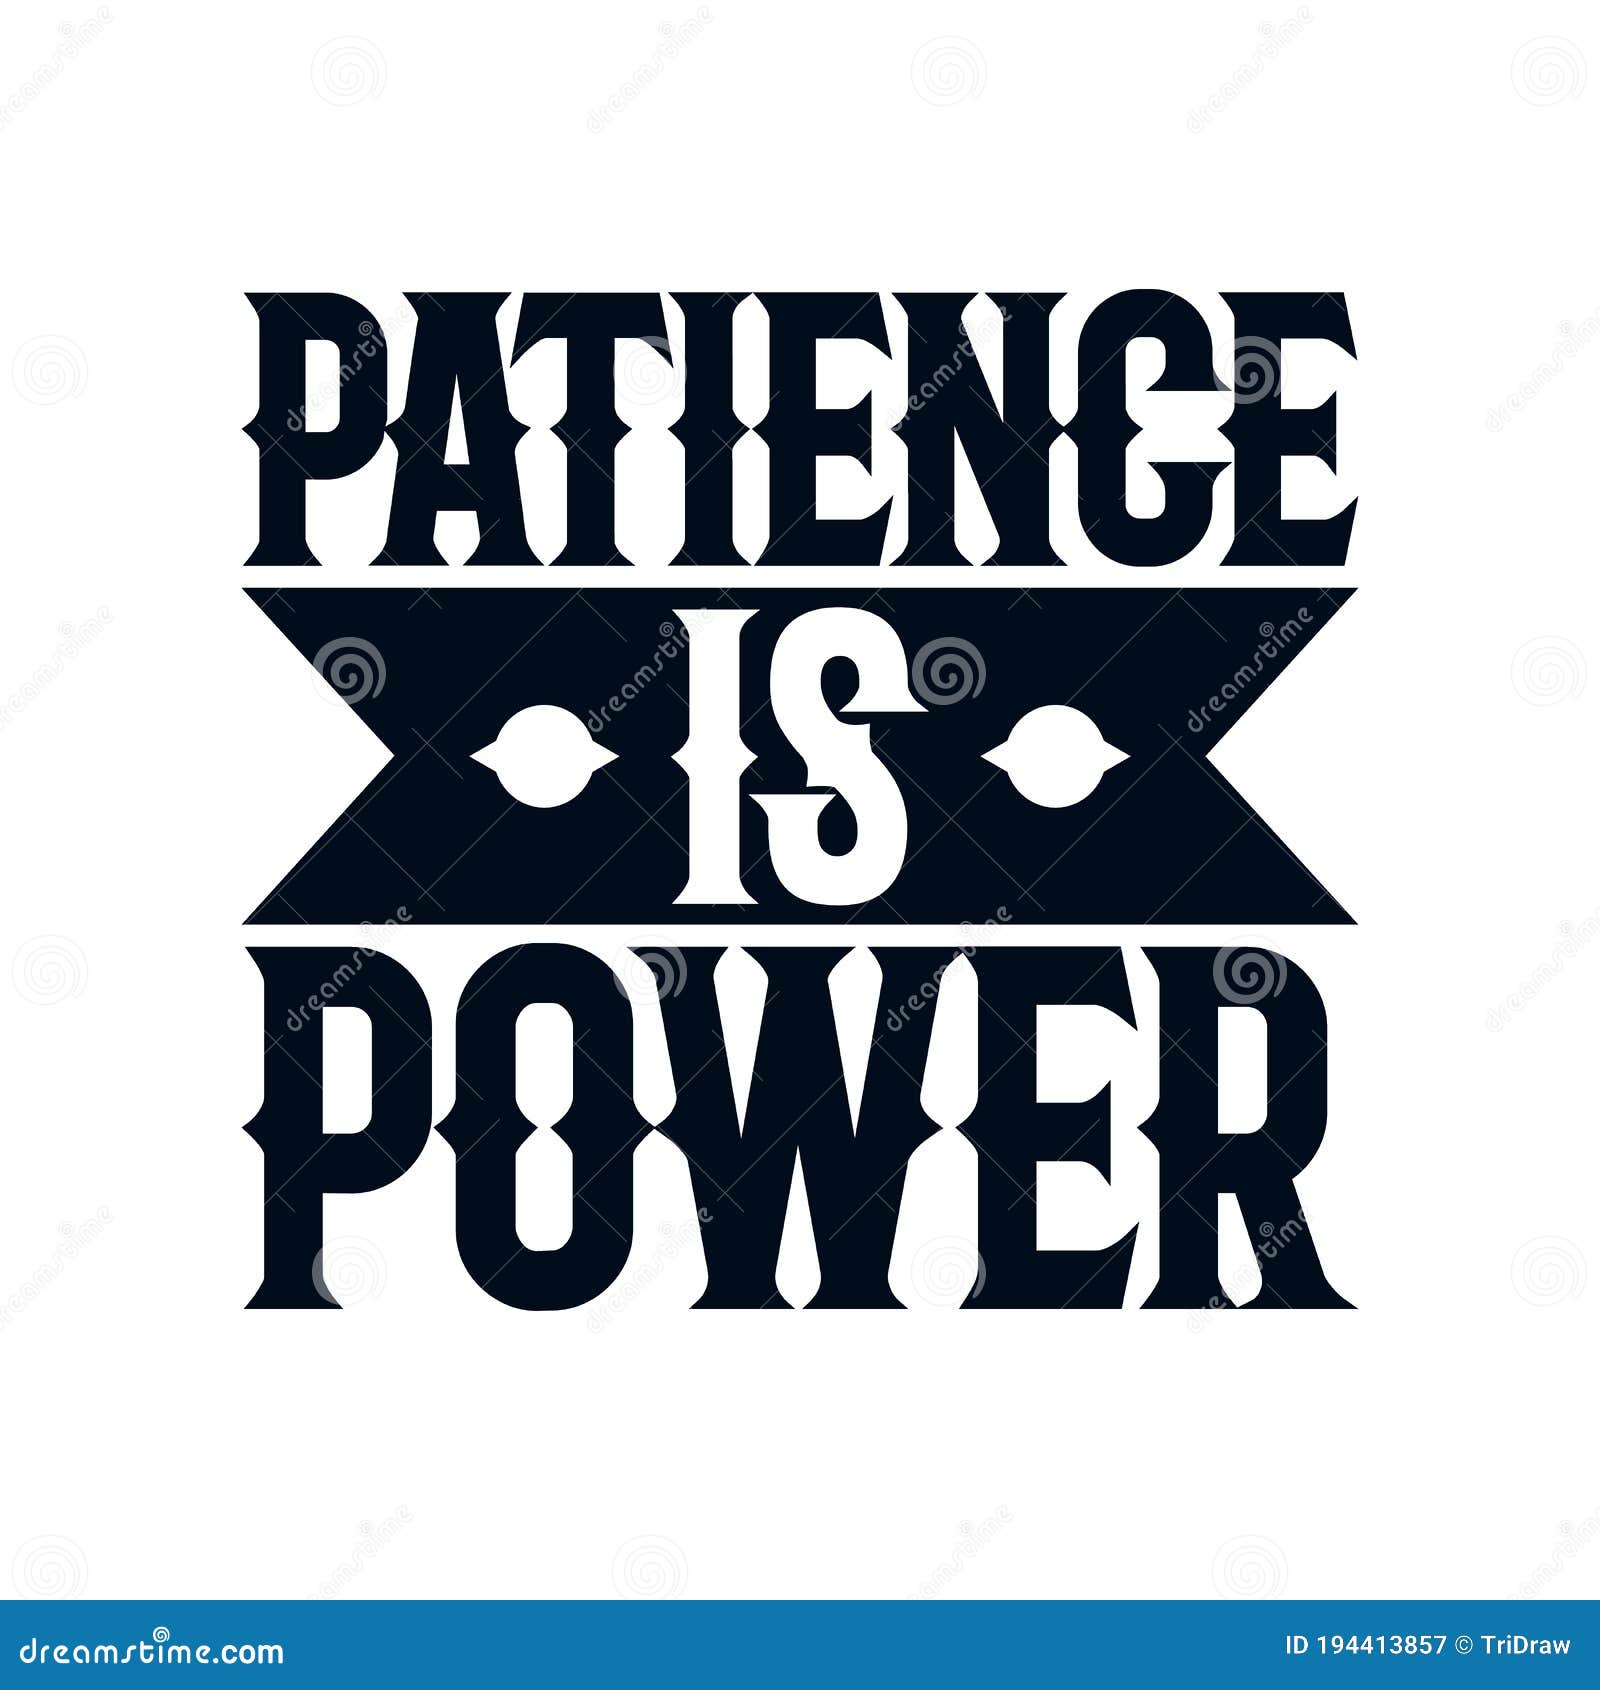 patience is power